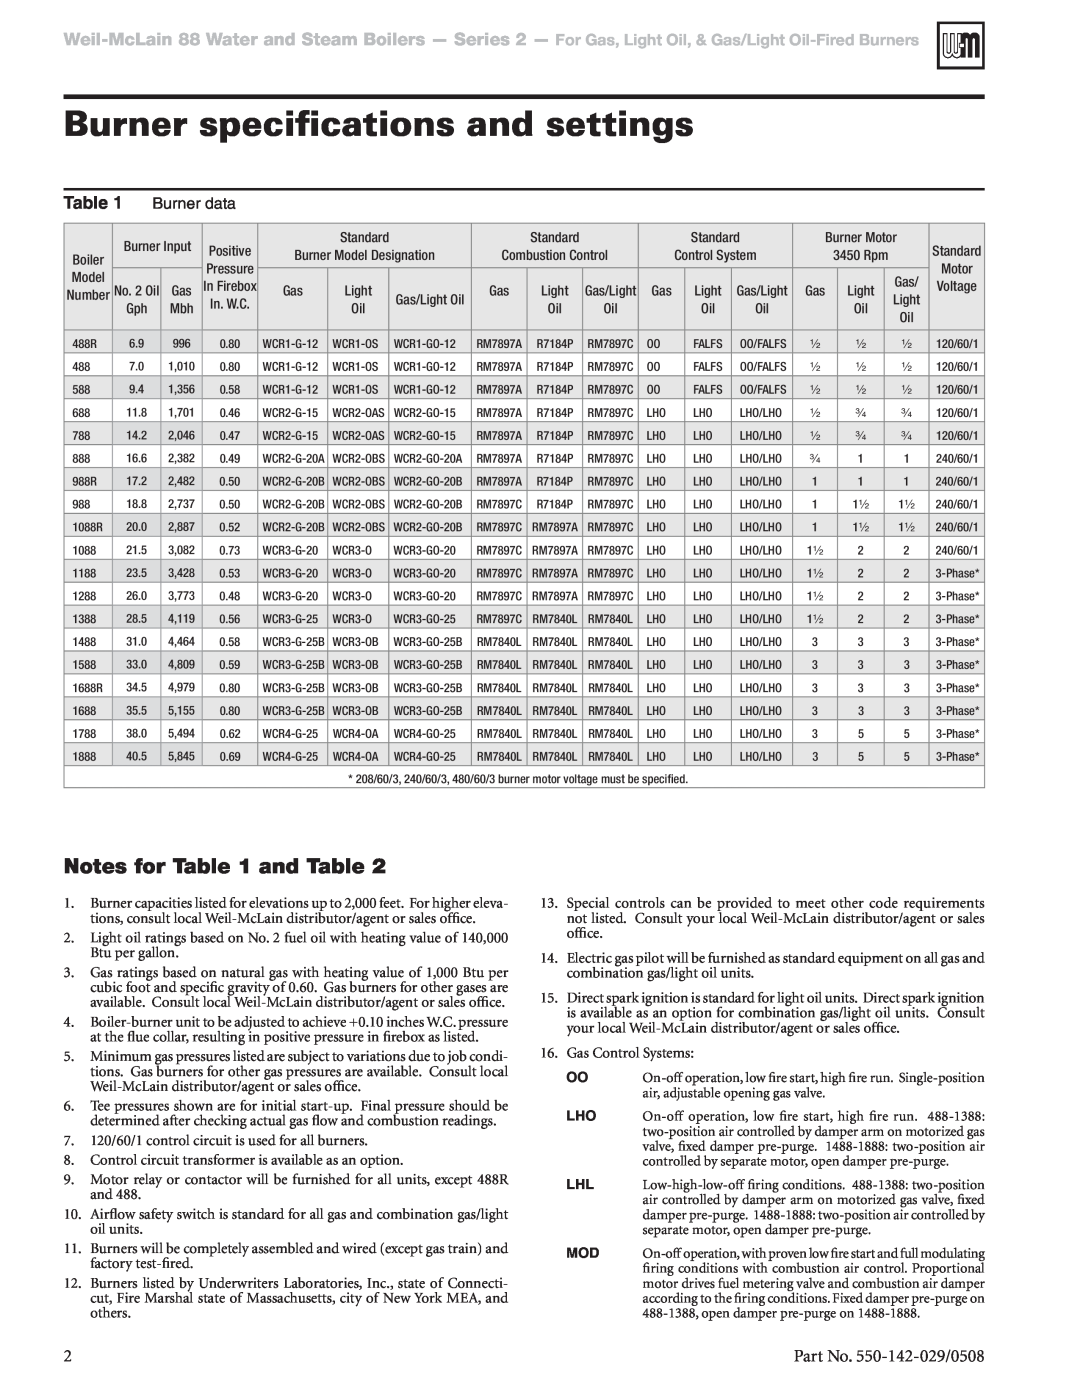 Weil-McLain WCR manual Burner specifications and settings, Notes for and Table, Burner data, Part No. 550-142-029/0508 